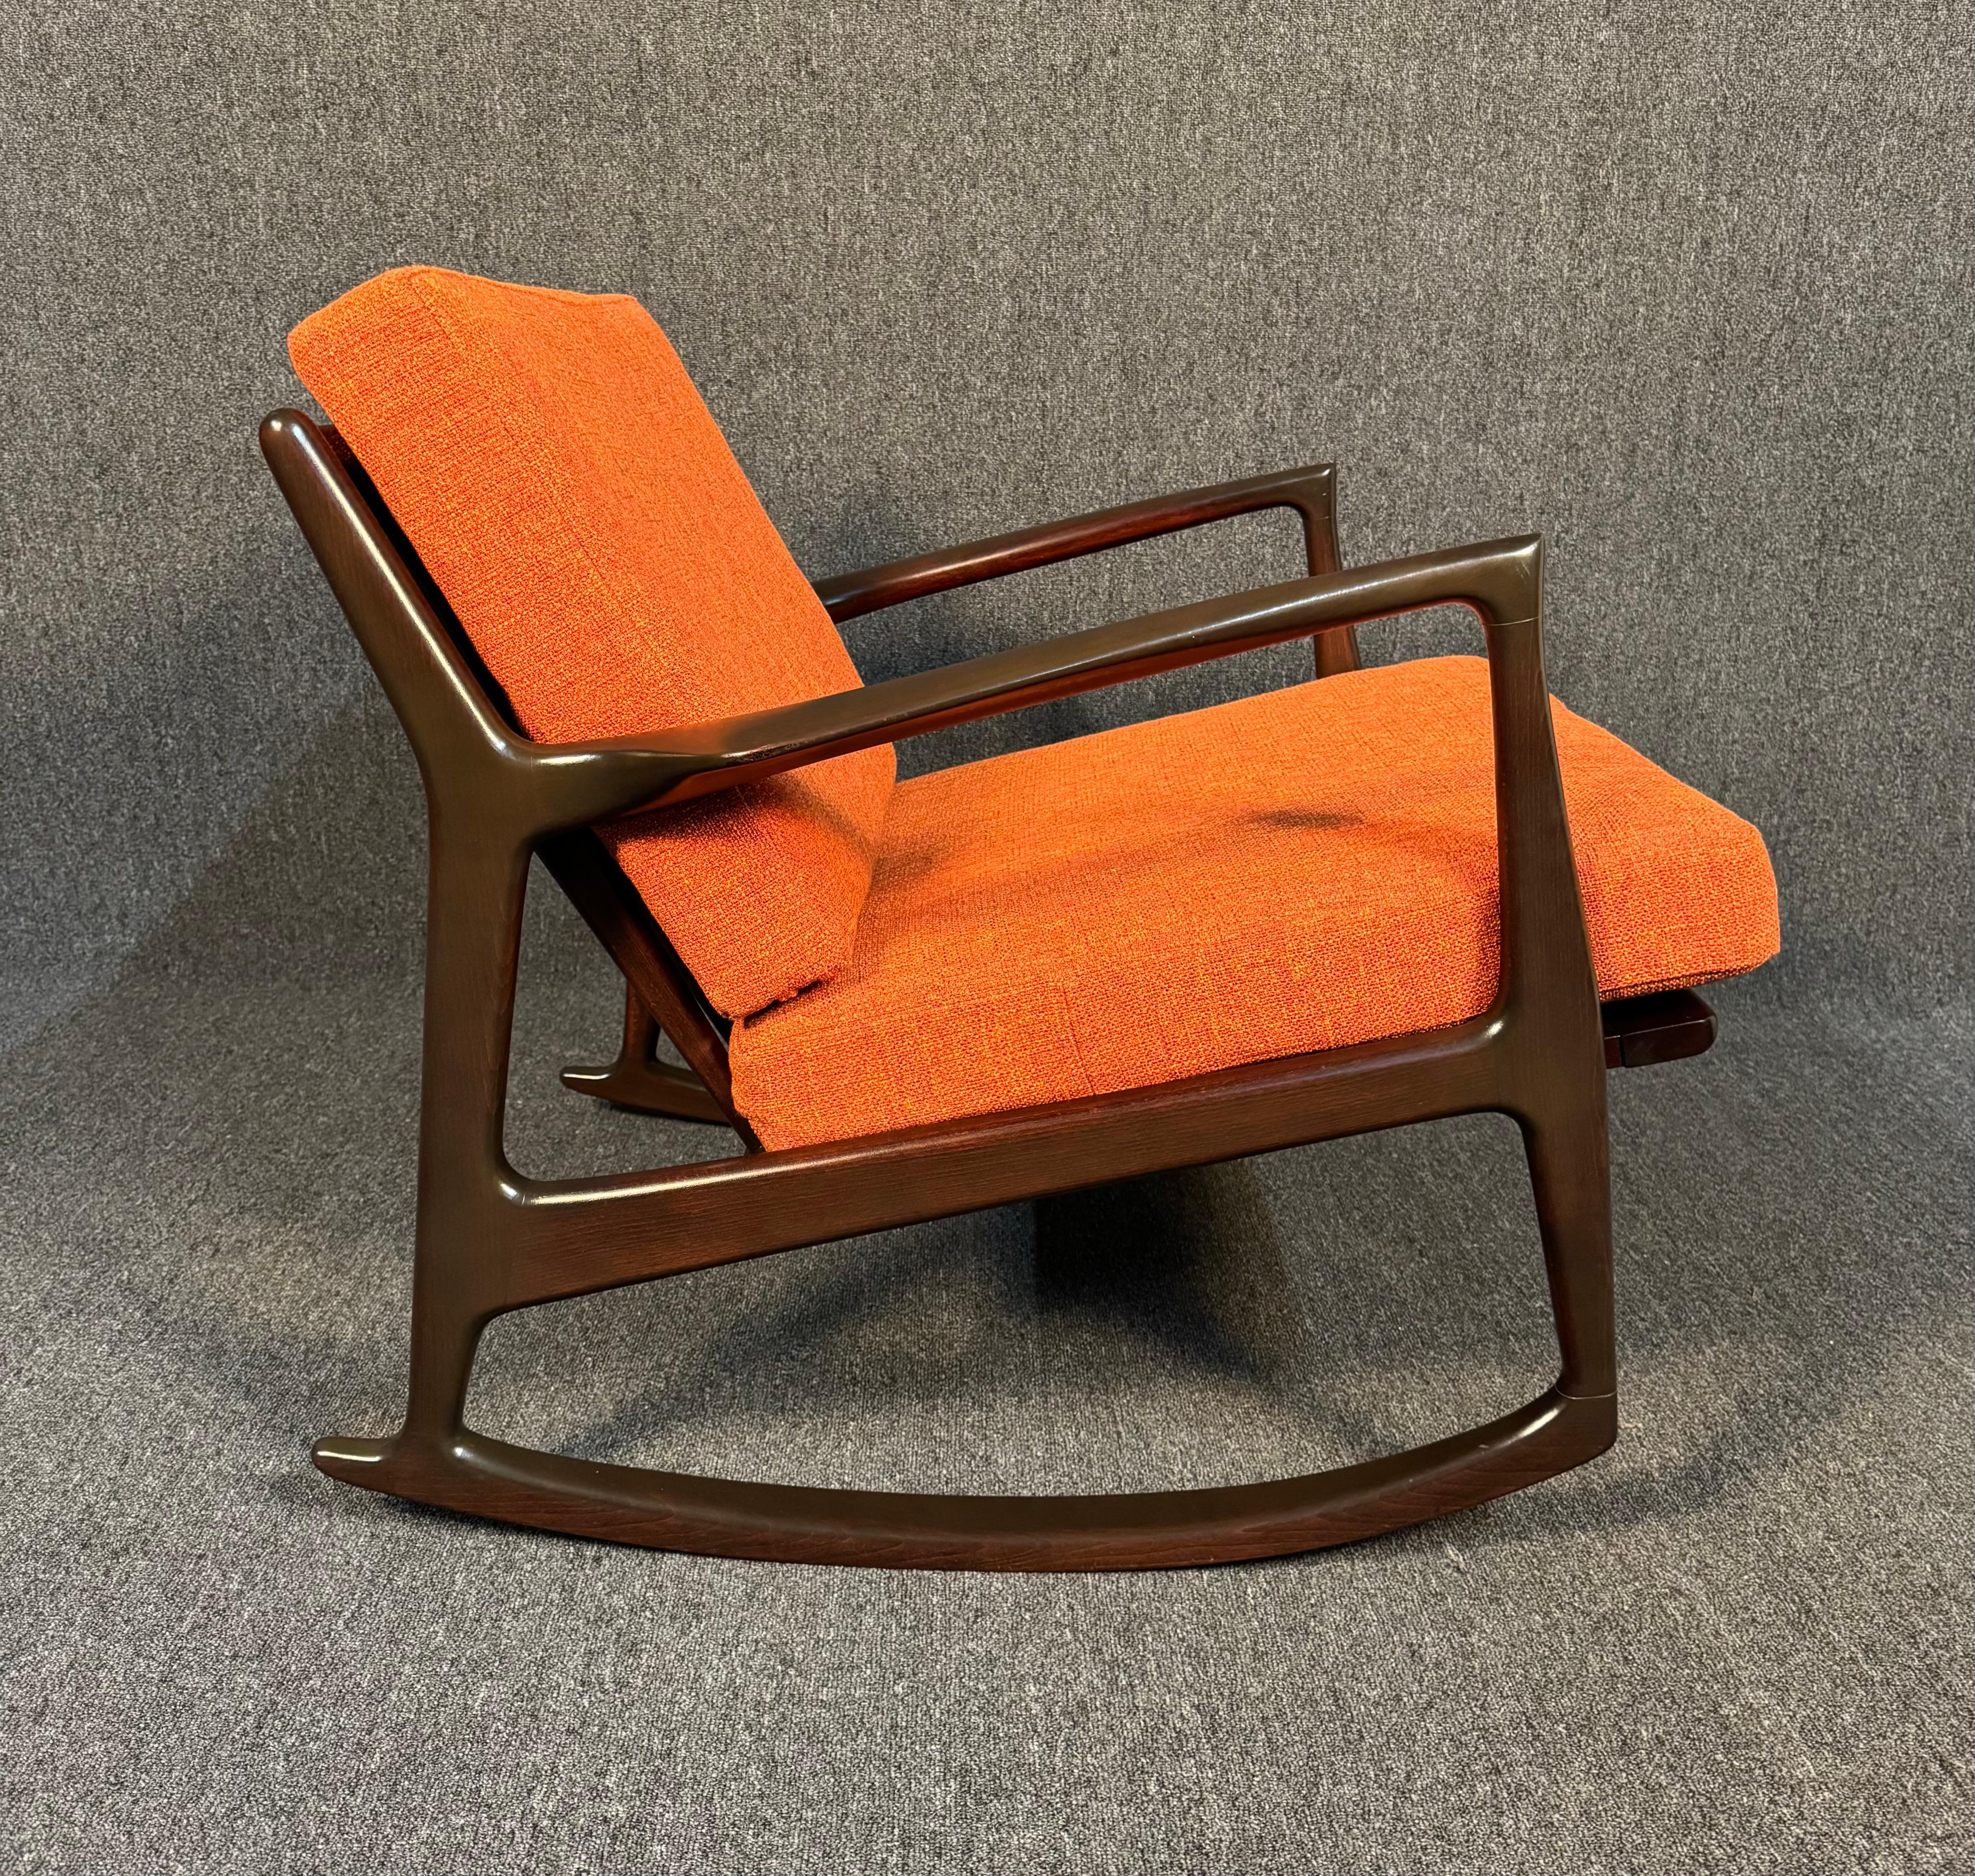 Vintage Danish Mid Century Modern Rocking Chair by Kofod Larsen for Selig In Good Condition For Sale In San Marcos, CA